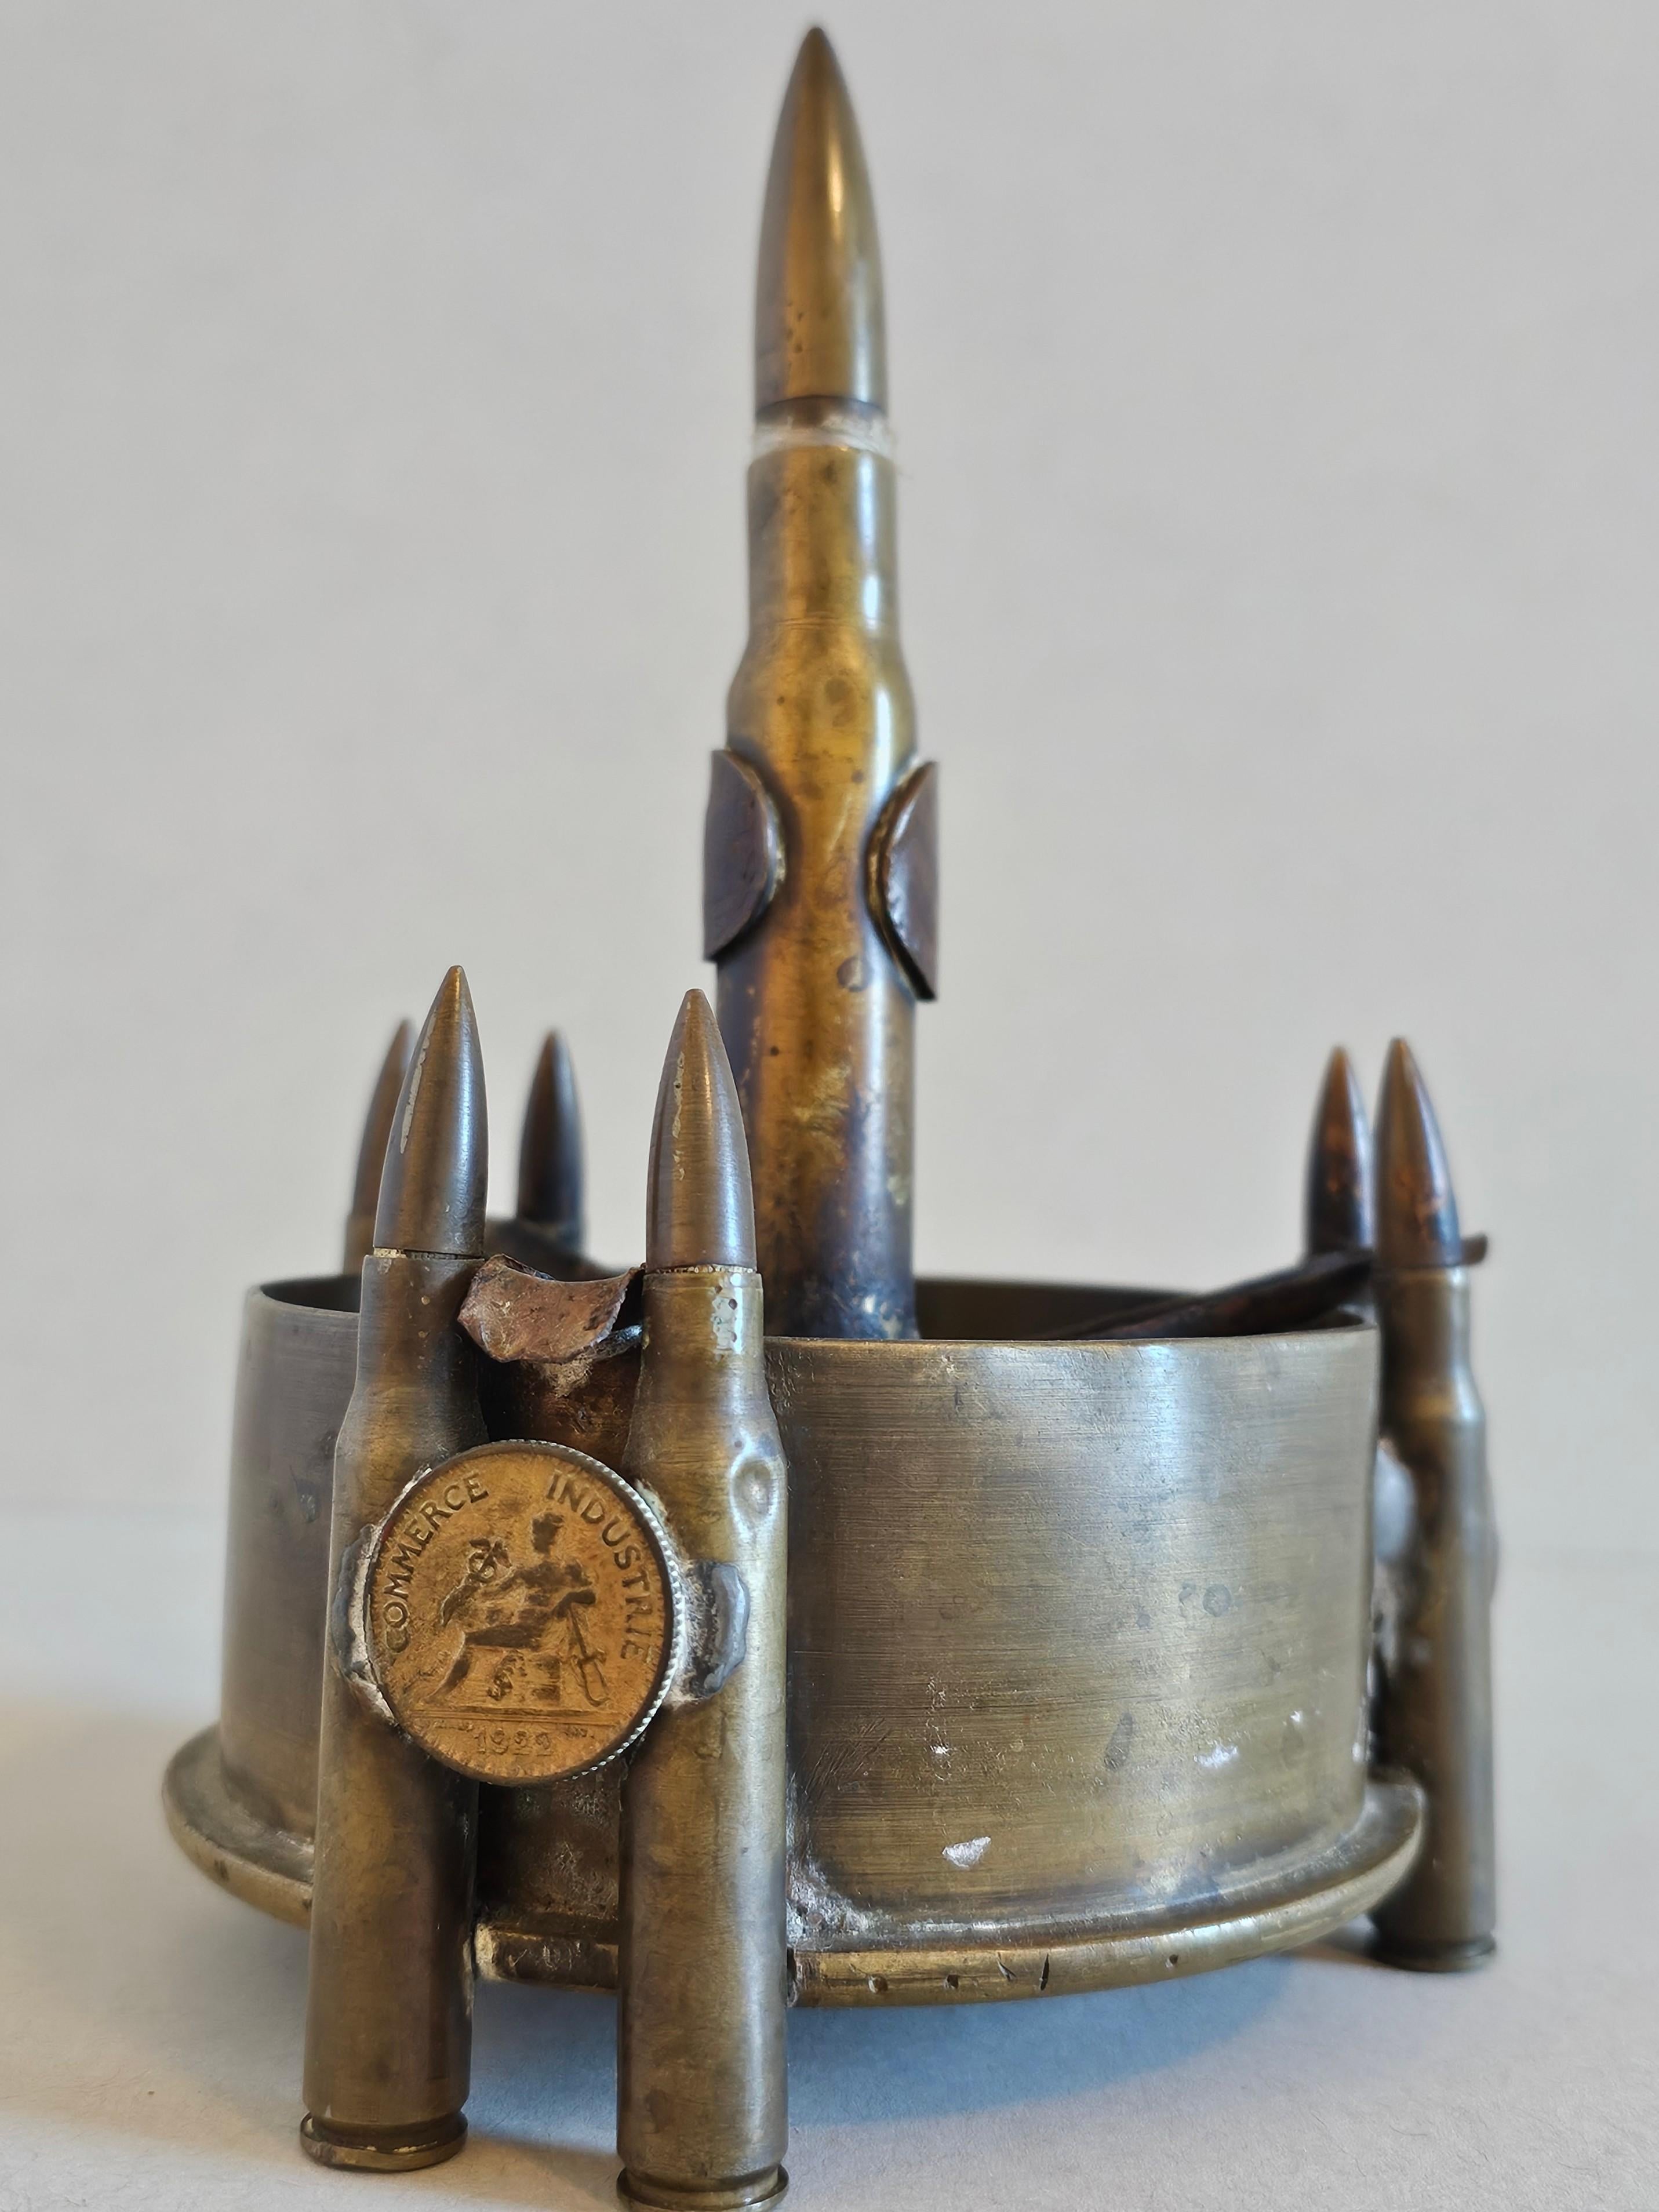 WWII Trench Art Artillery Shell Bullet Coin Ashtray  In Fair Condition For Sale In Forney, TX